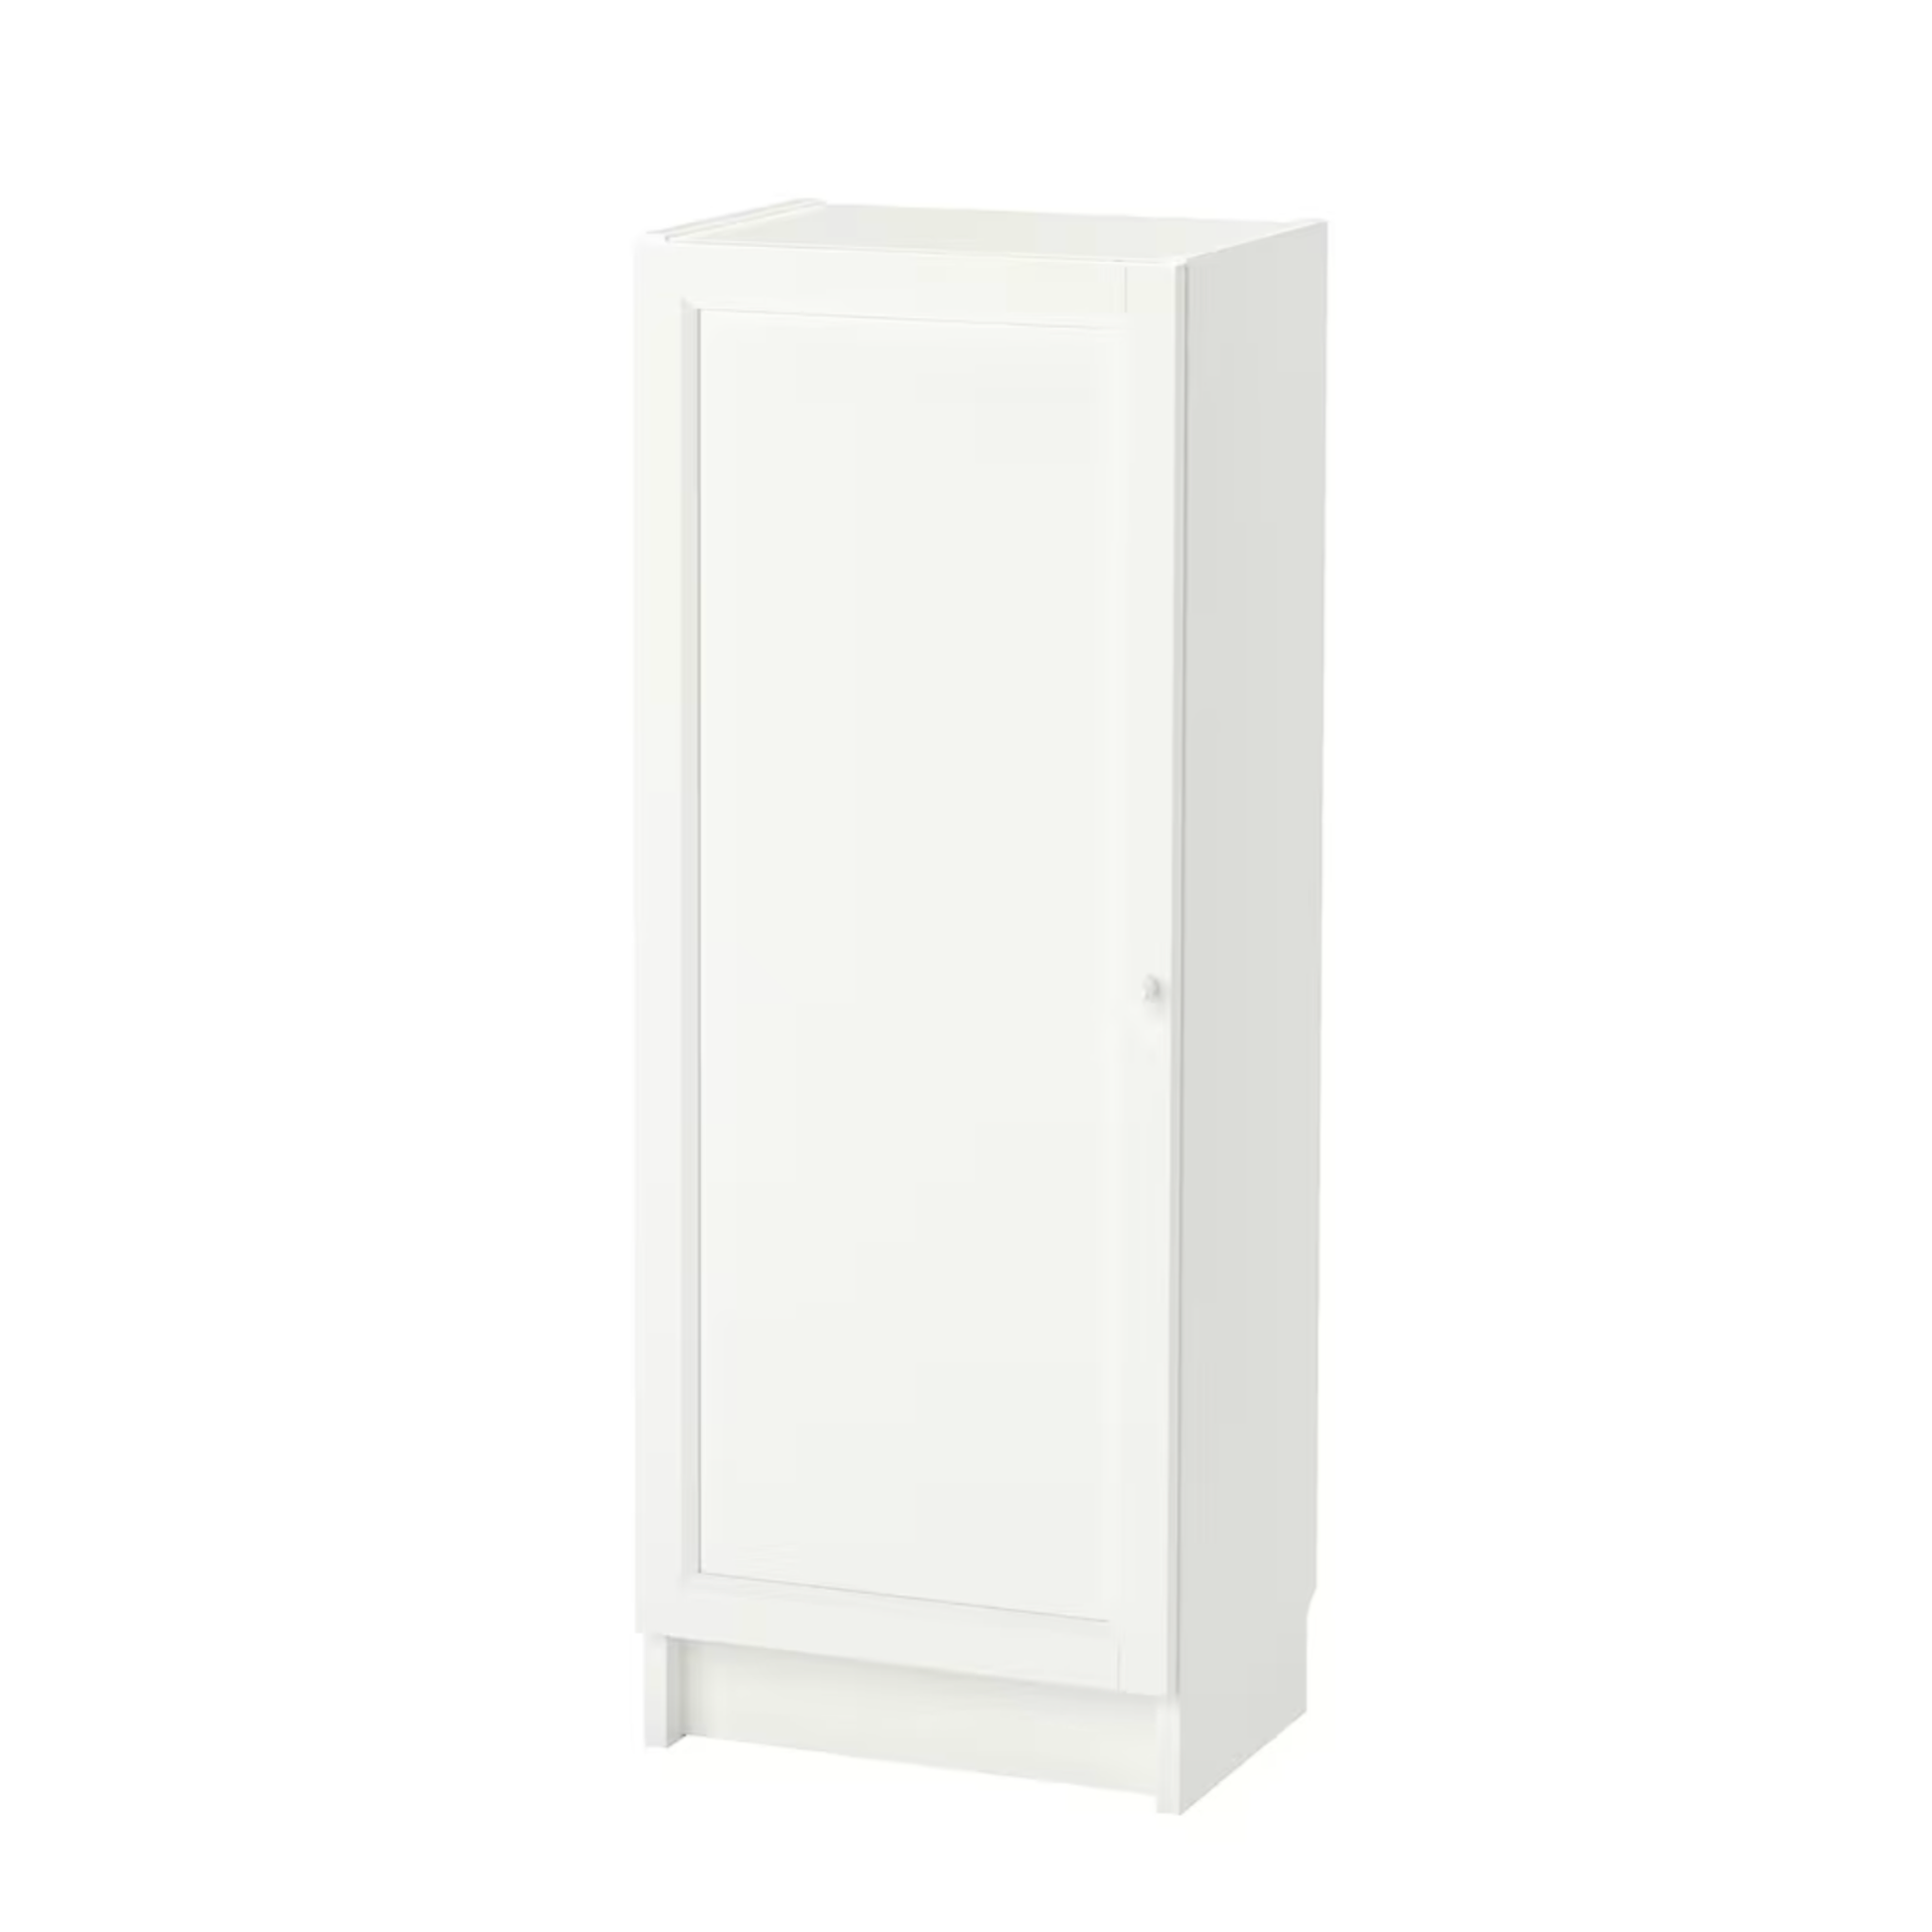 Ikea Billy Bookcase with Oxberg Solid Door, 40x30x106cm, White1 (8129567424799)